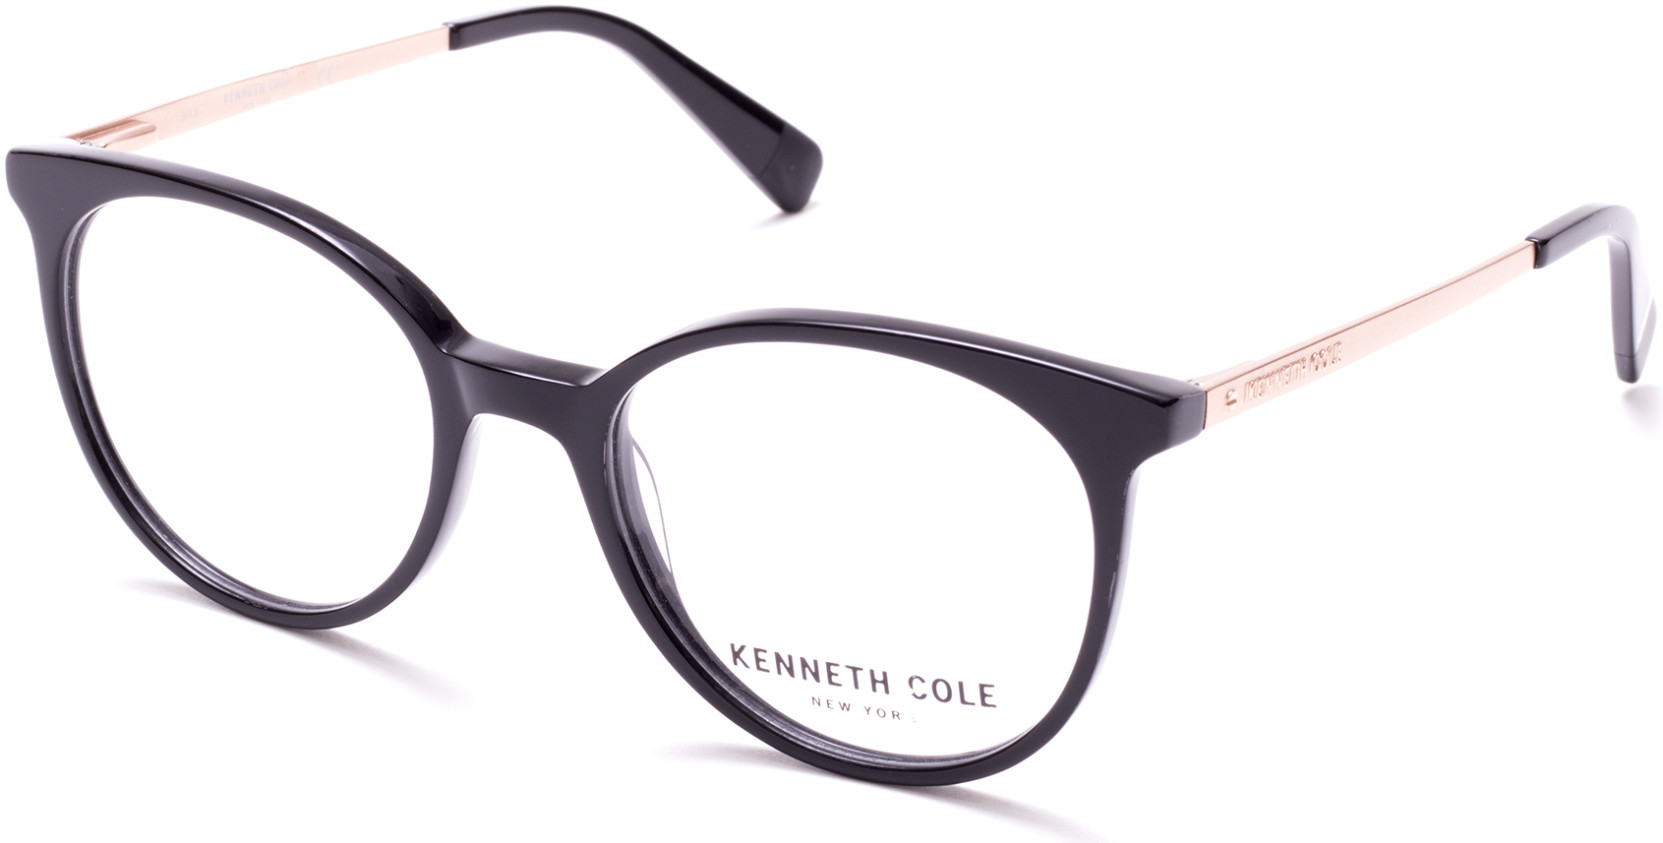 KENNETH COLE NY 0288 001